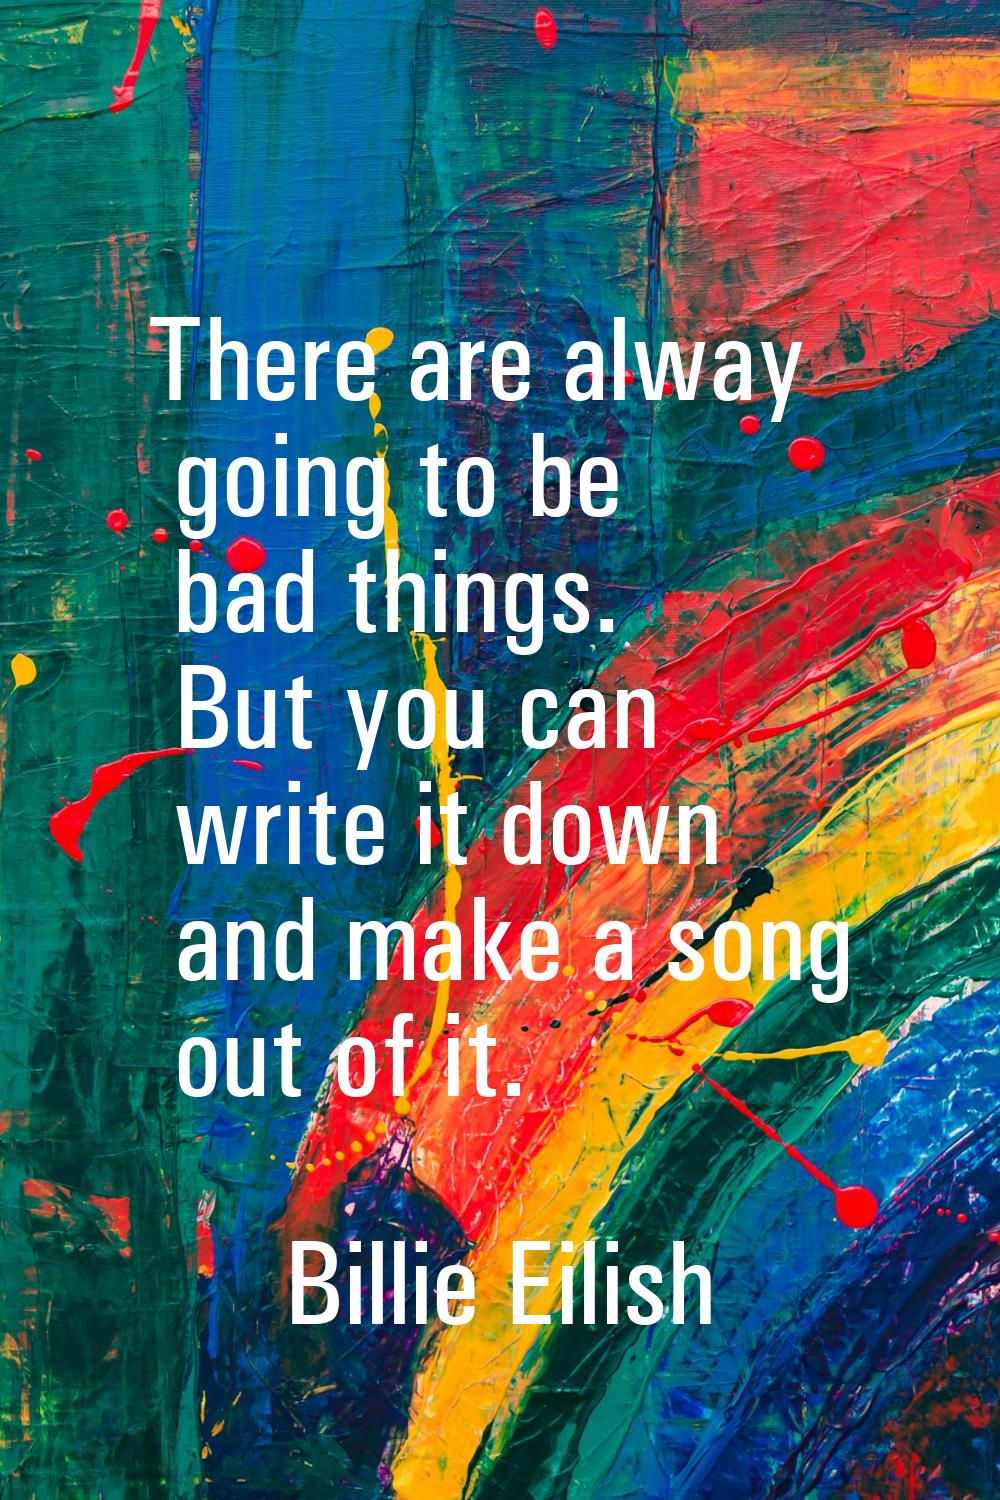 There are alway going to be bad things. But you can write it down and make a song out of it.